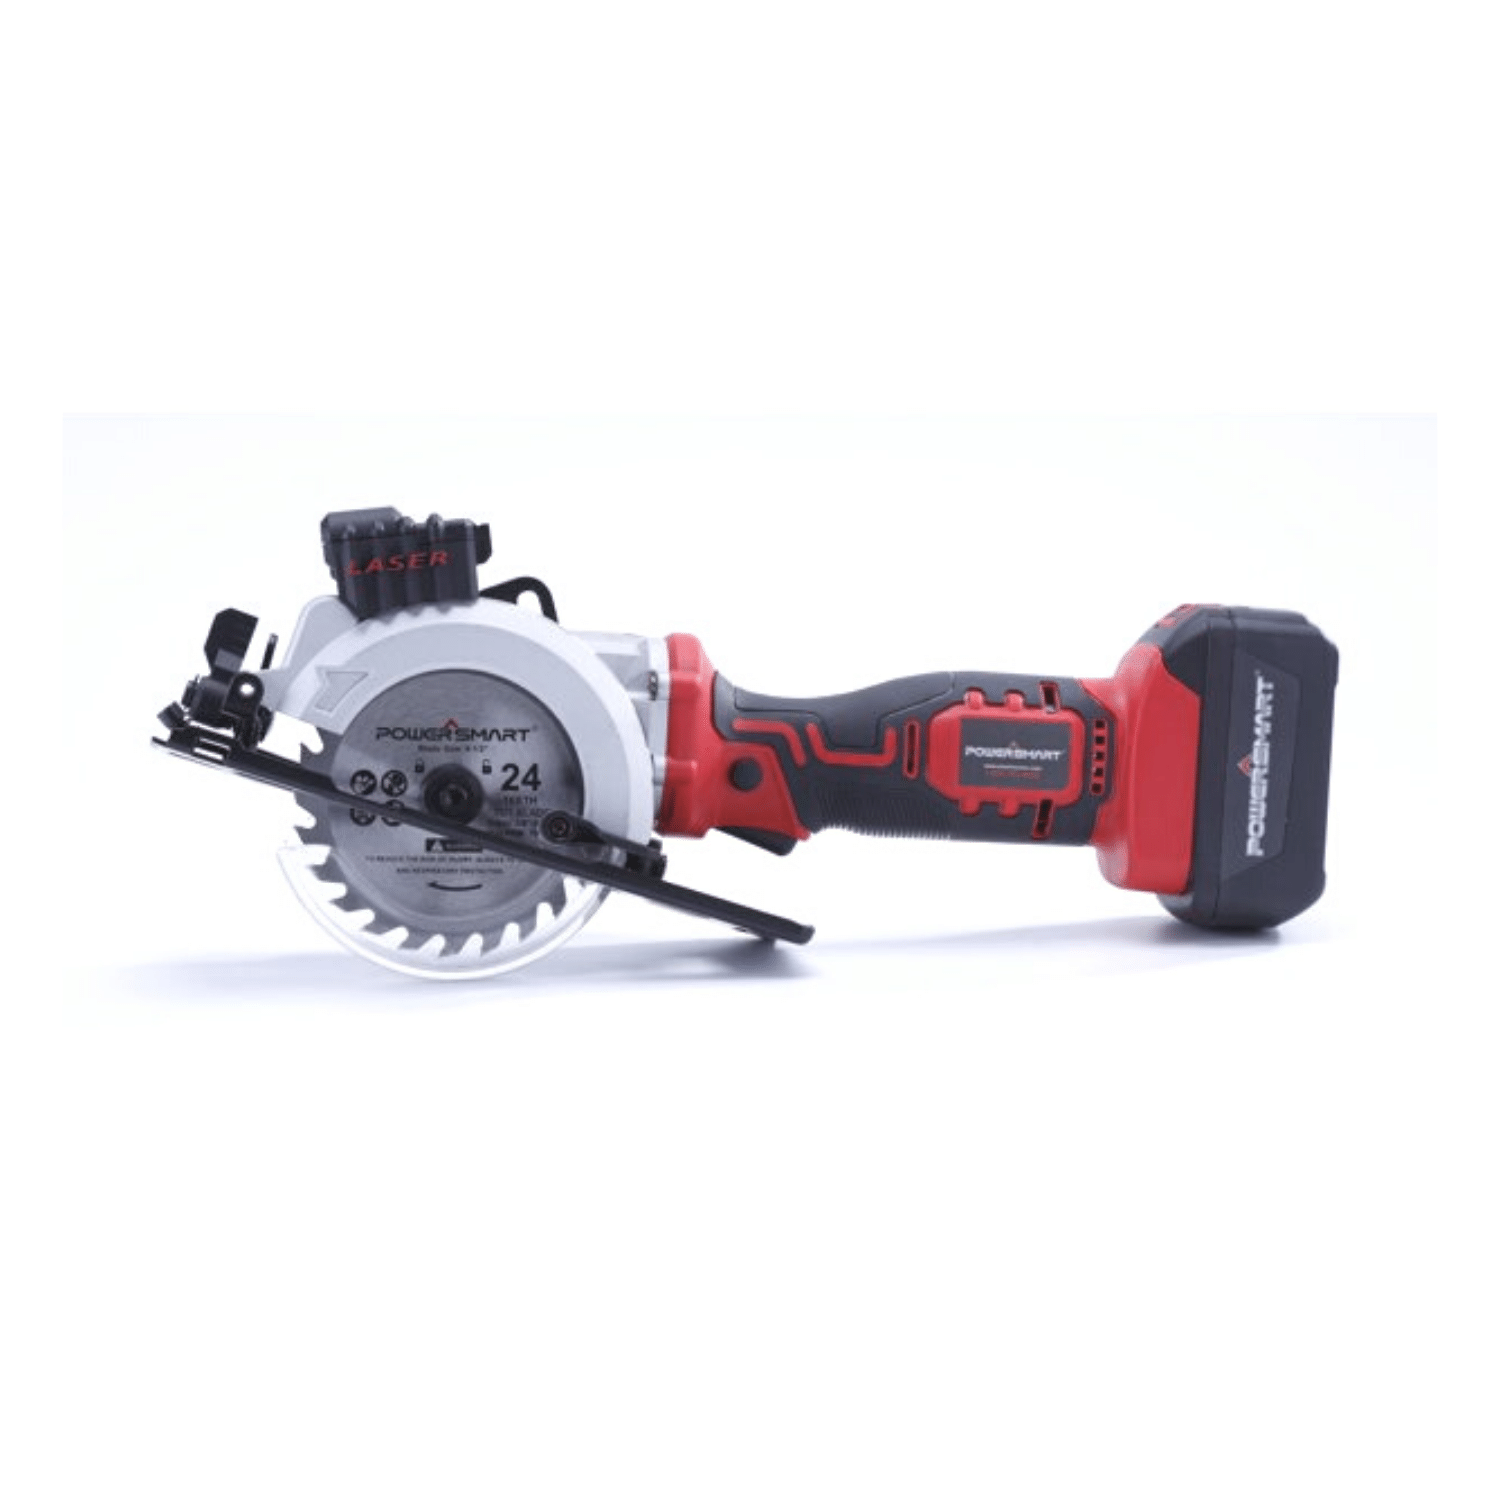 PowerSmart PS76138A 20V Cordless 4 1/2 in. Mini Circular Saw With 4.0 Ah Battery And Charger